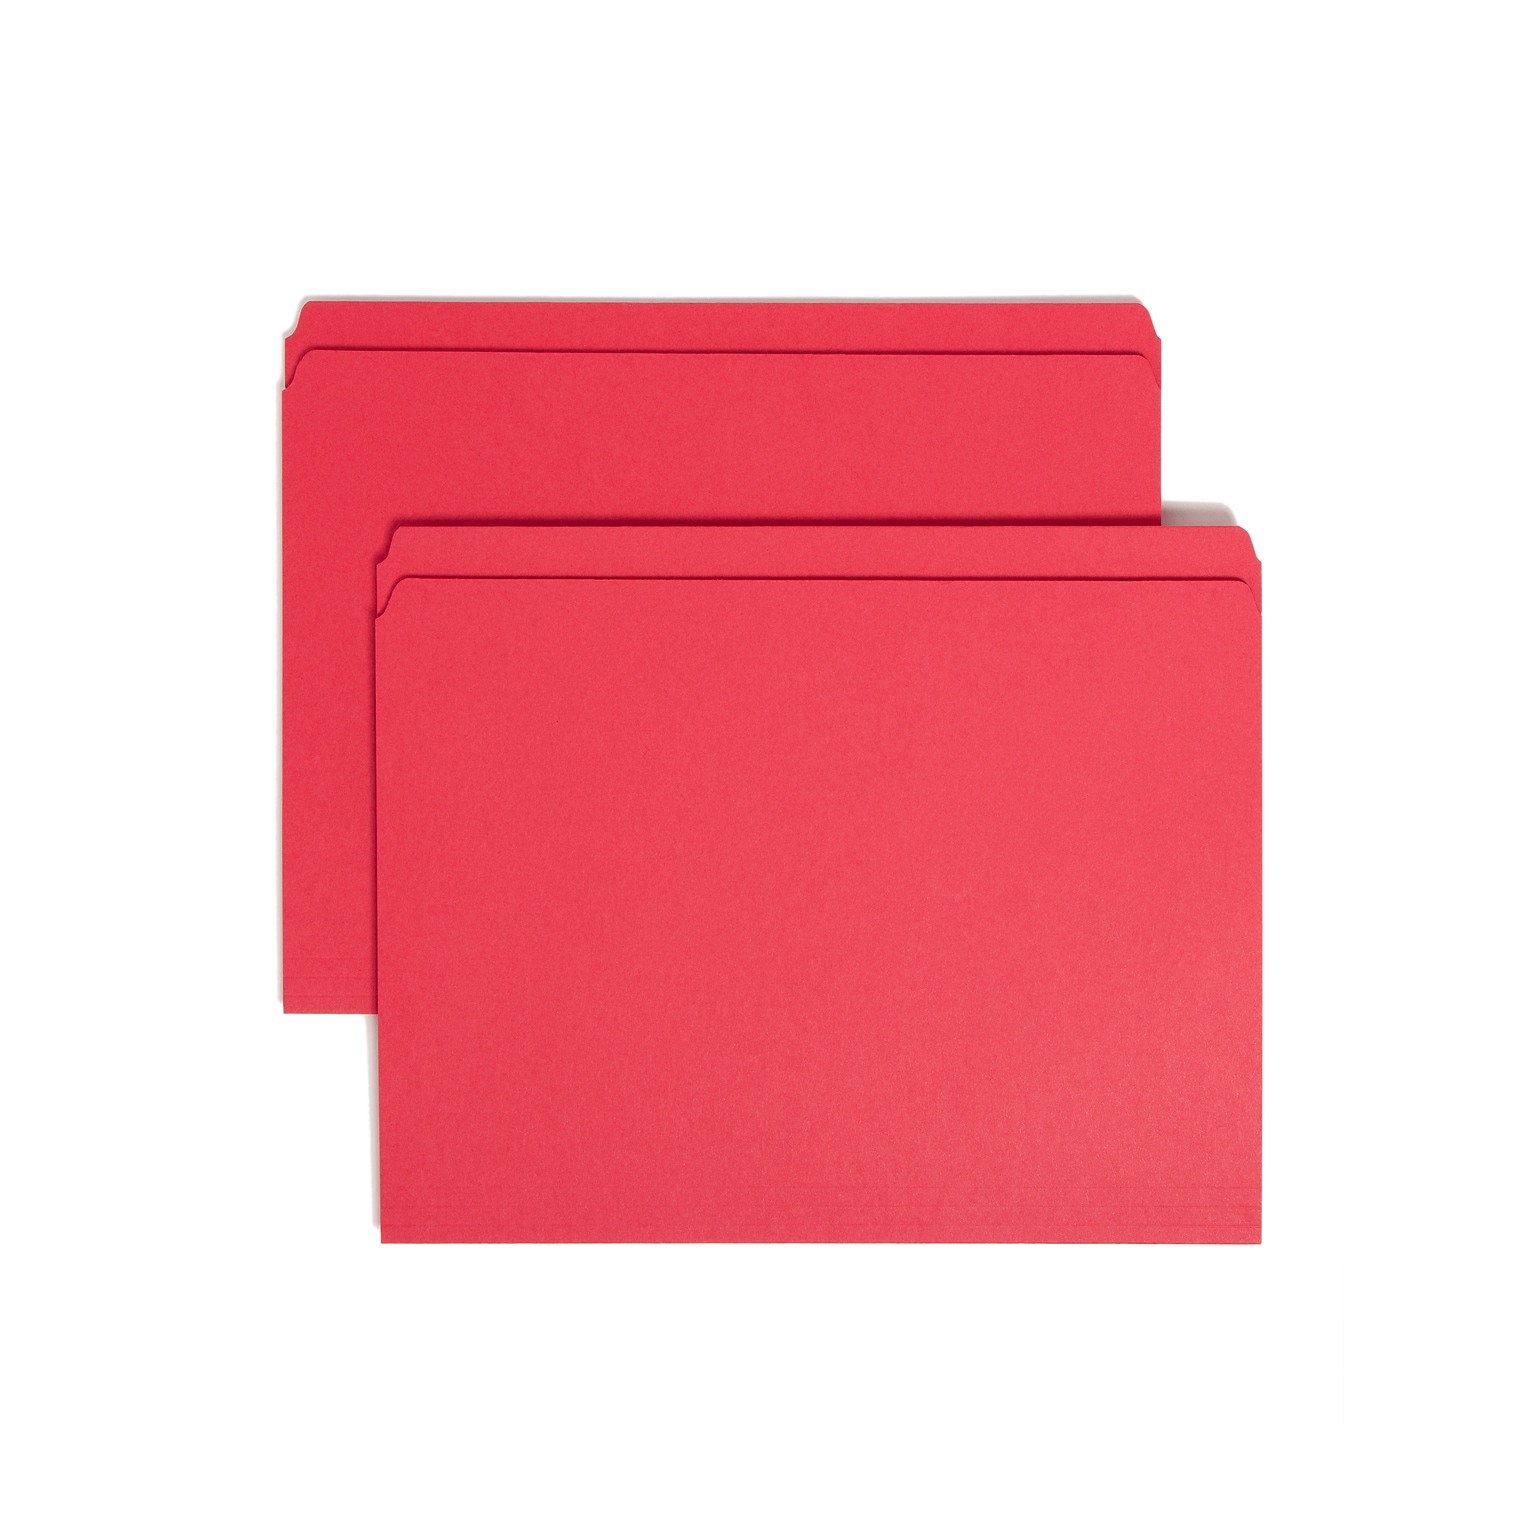 Smead File Folder, Reinforced Straight-Cut Tab, Letter Size, Red, 100/Box (12710)